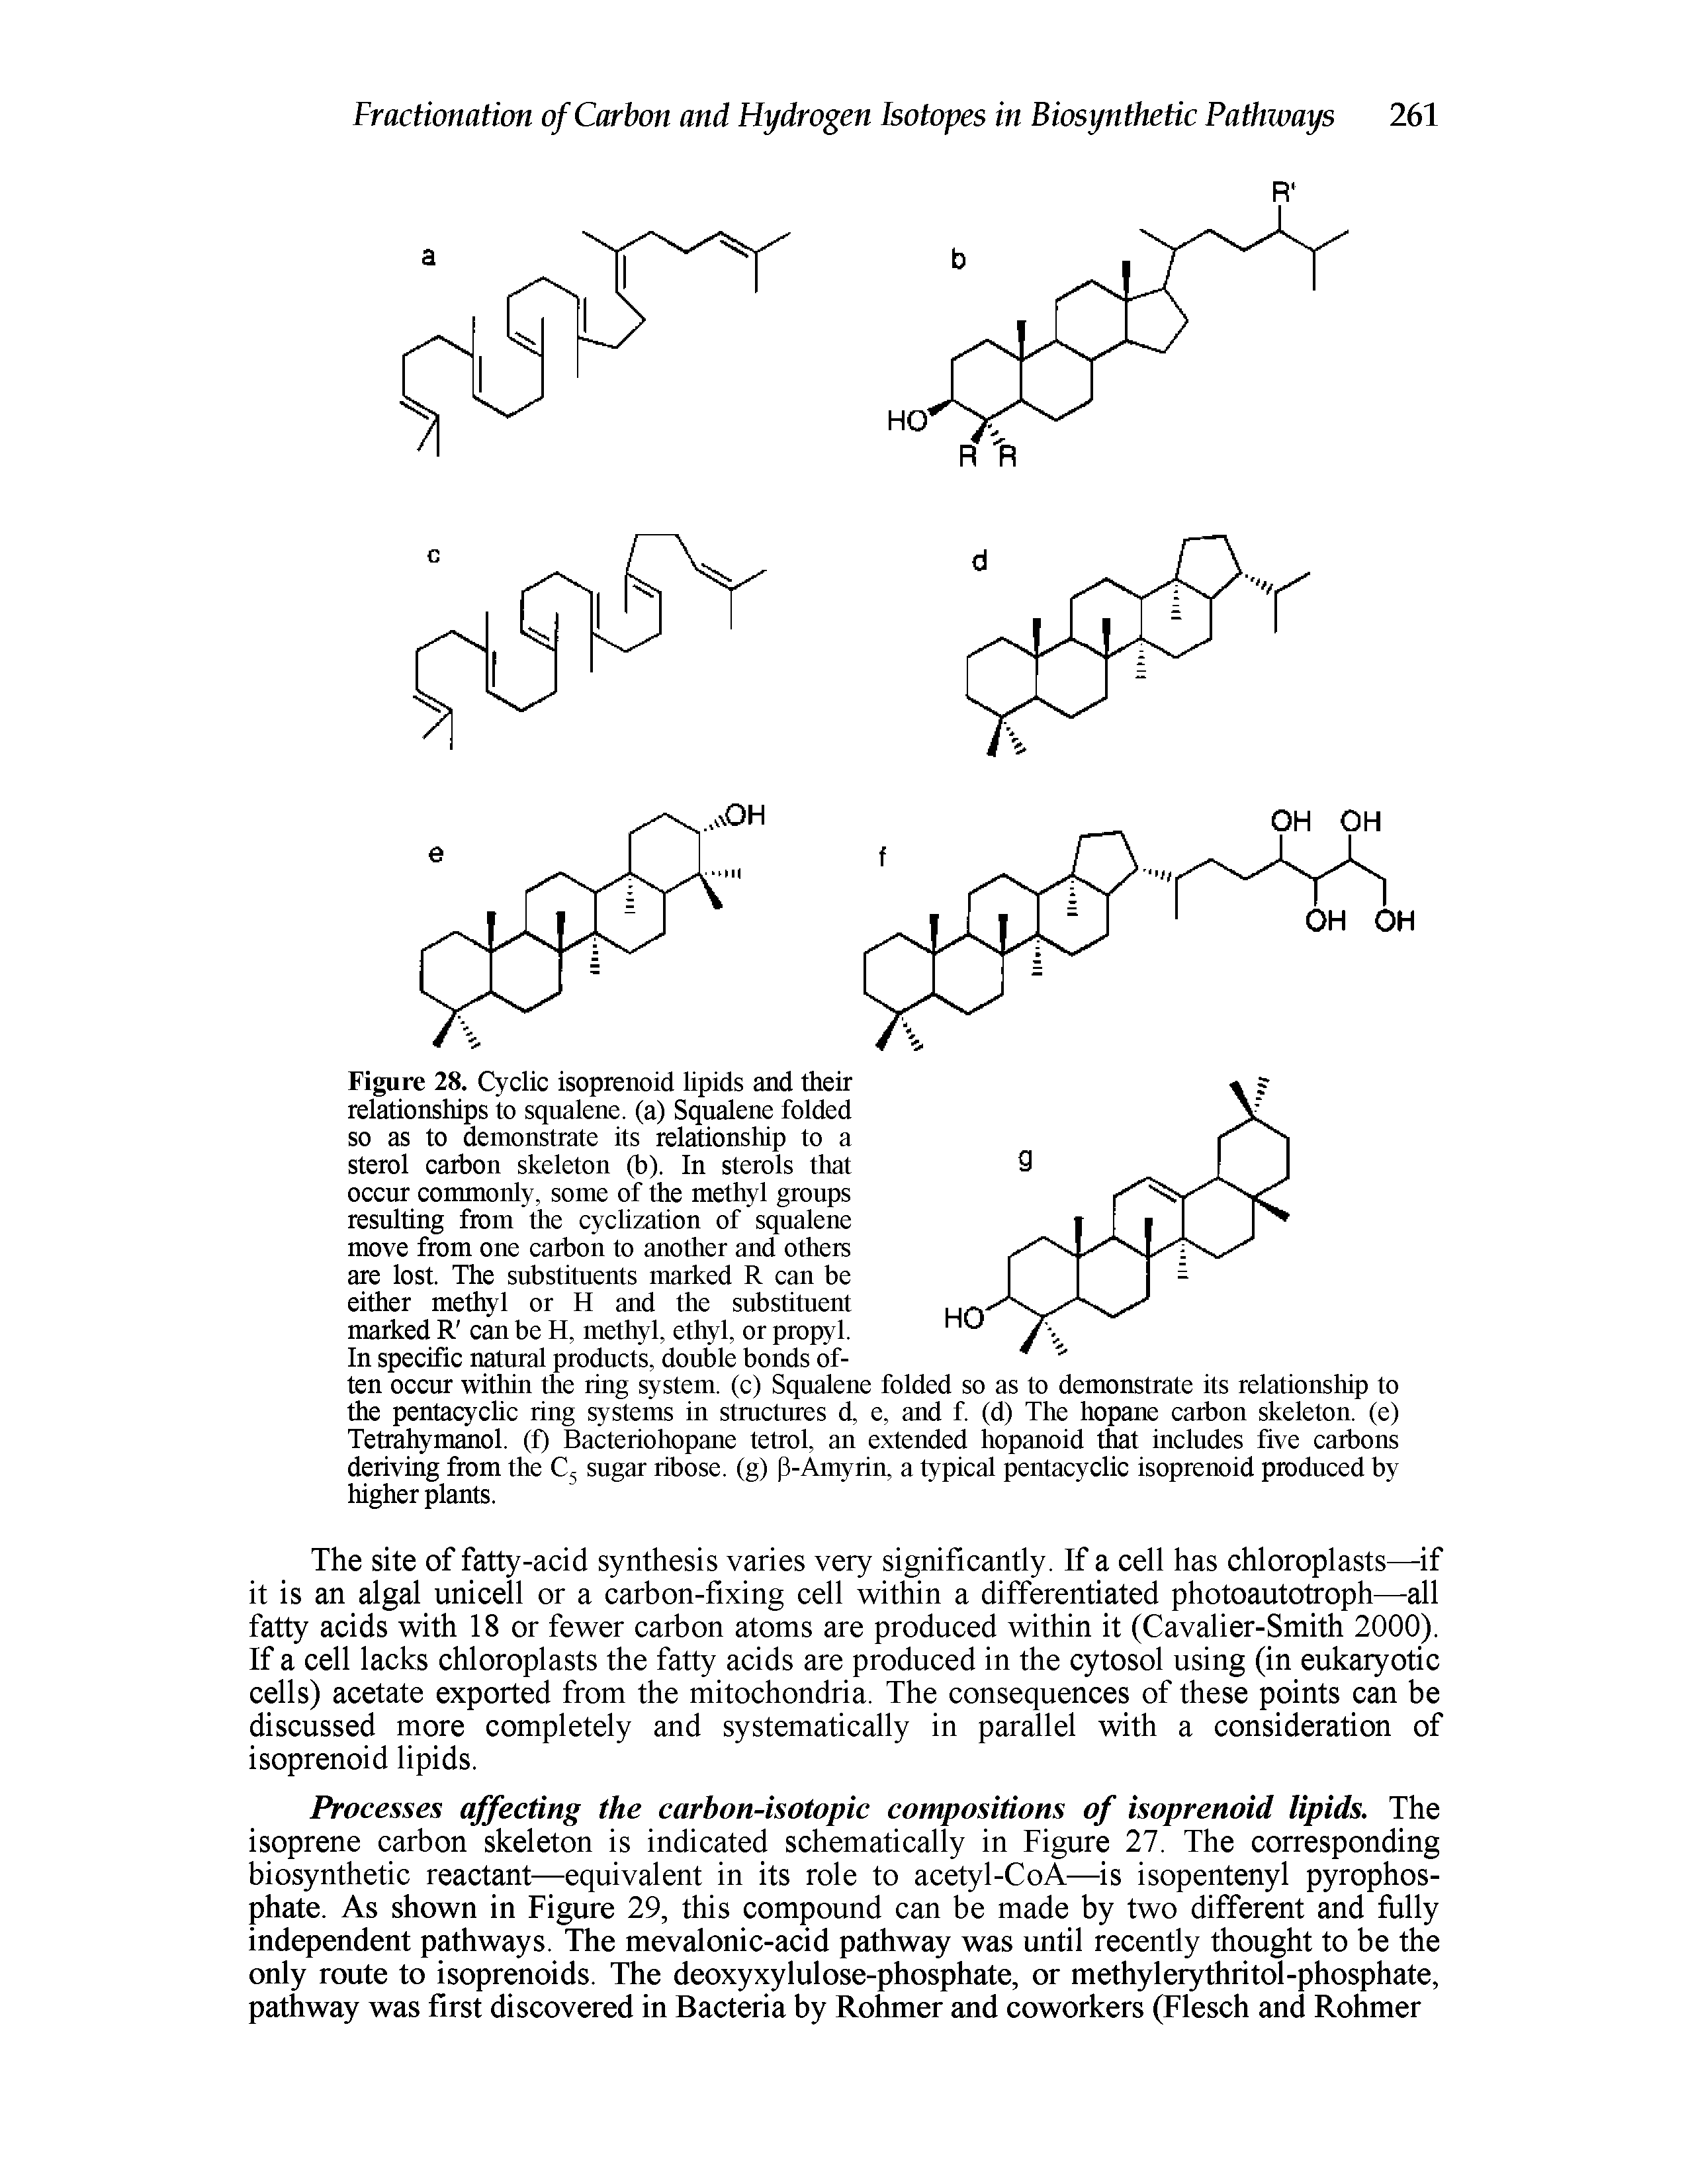 Figure 28. Cyclic isoprenoid lipids and their relationships to squalene. (a) Squalene folded so as to demonstrate its relationship to a sterol carbon skeleton (b). In sterols that occur commonly, some of the methyl groups resulting from the cyclization of squalene move from one carbon to another and others are lost. The substituents marked R can be either methyl or H and the substituent marked R can be H, methyl, ethyl, or propyl.